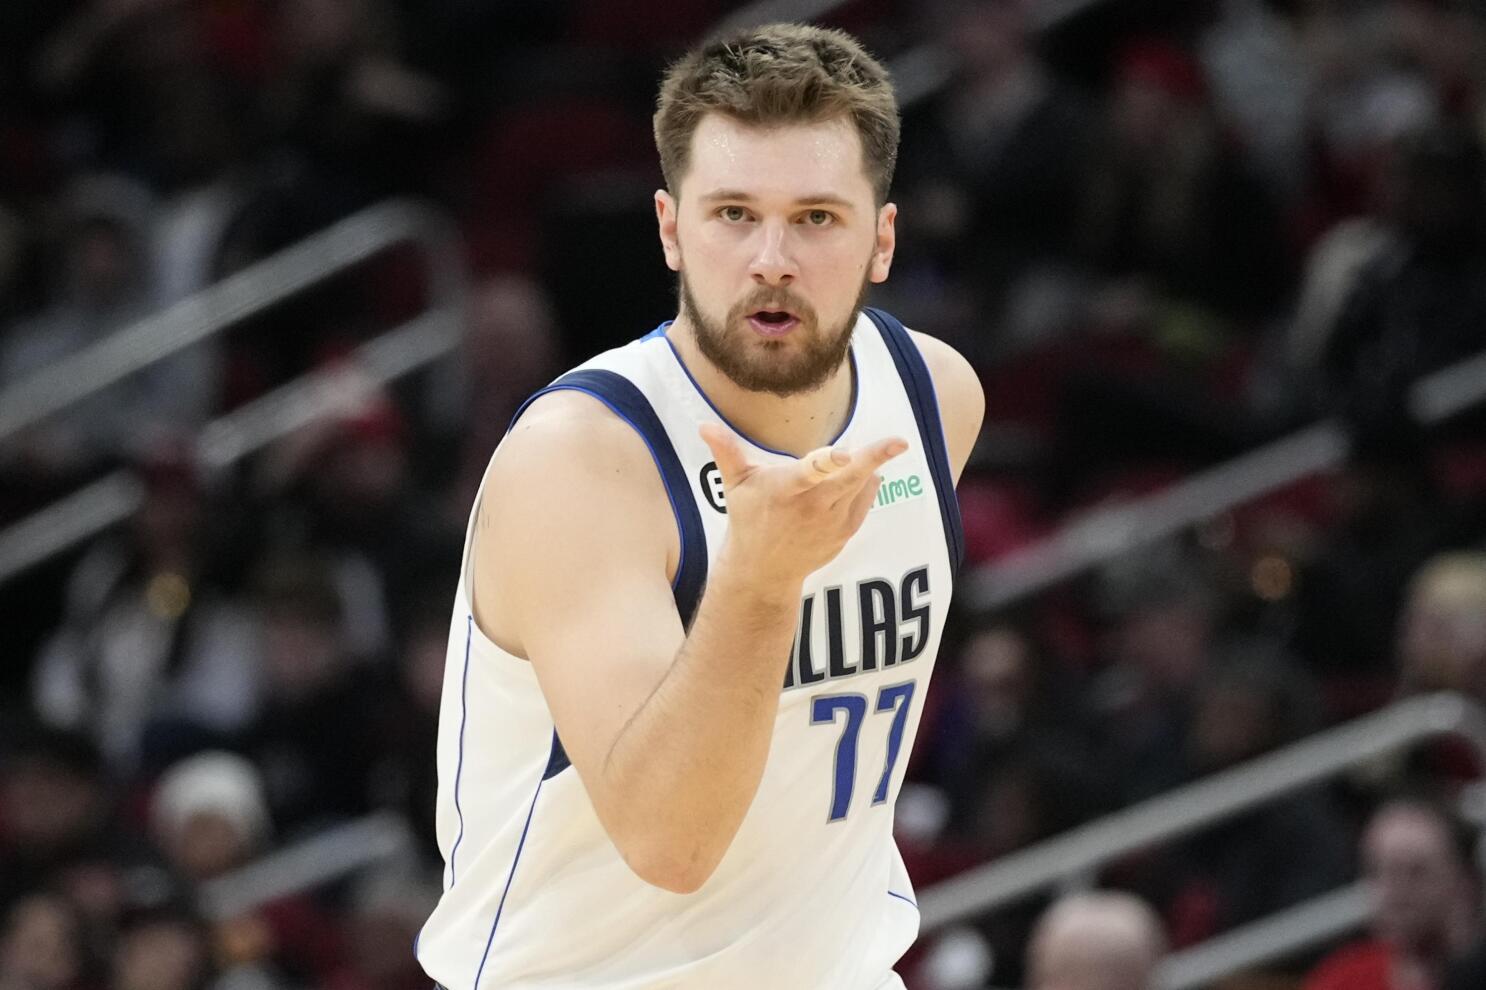 Luka Doncic scores 50 and Dallas holds off Houston, 112-106 - Mavs Moneyball